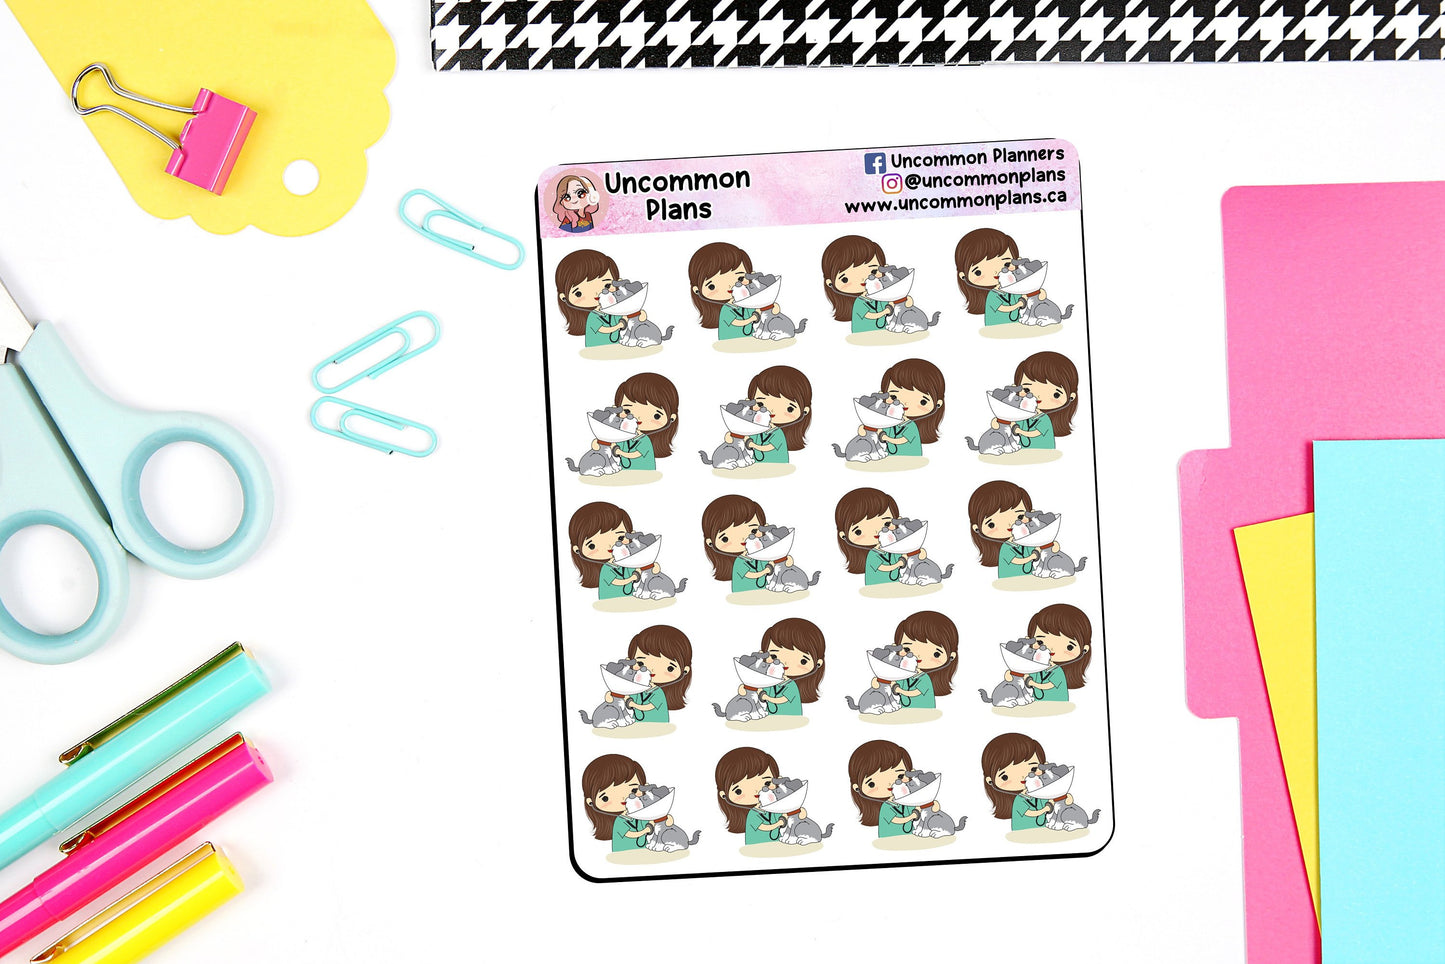 Dog Care Functional Deco Planner Stickers Sheet